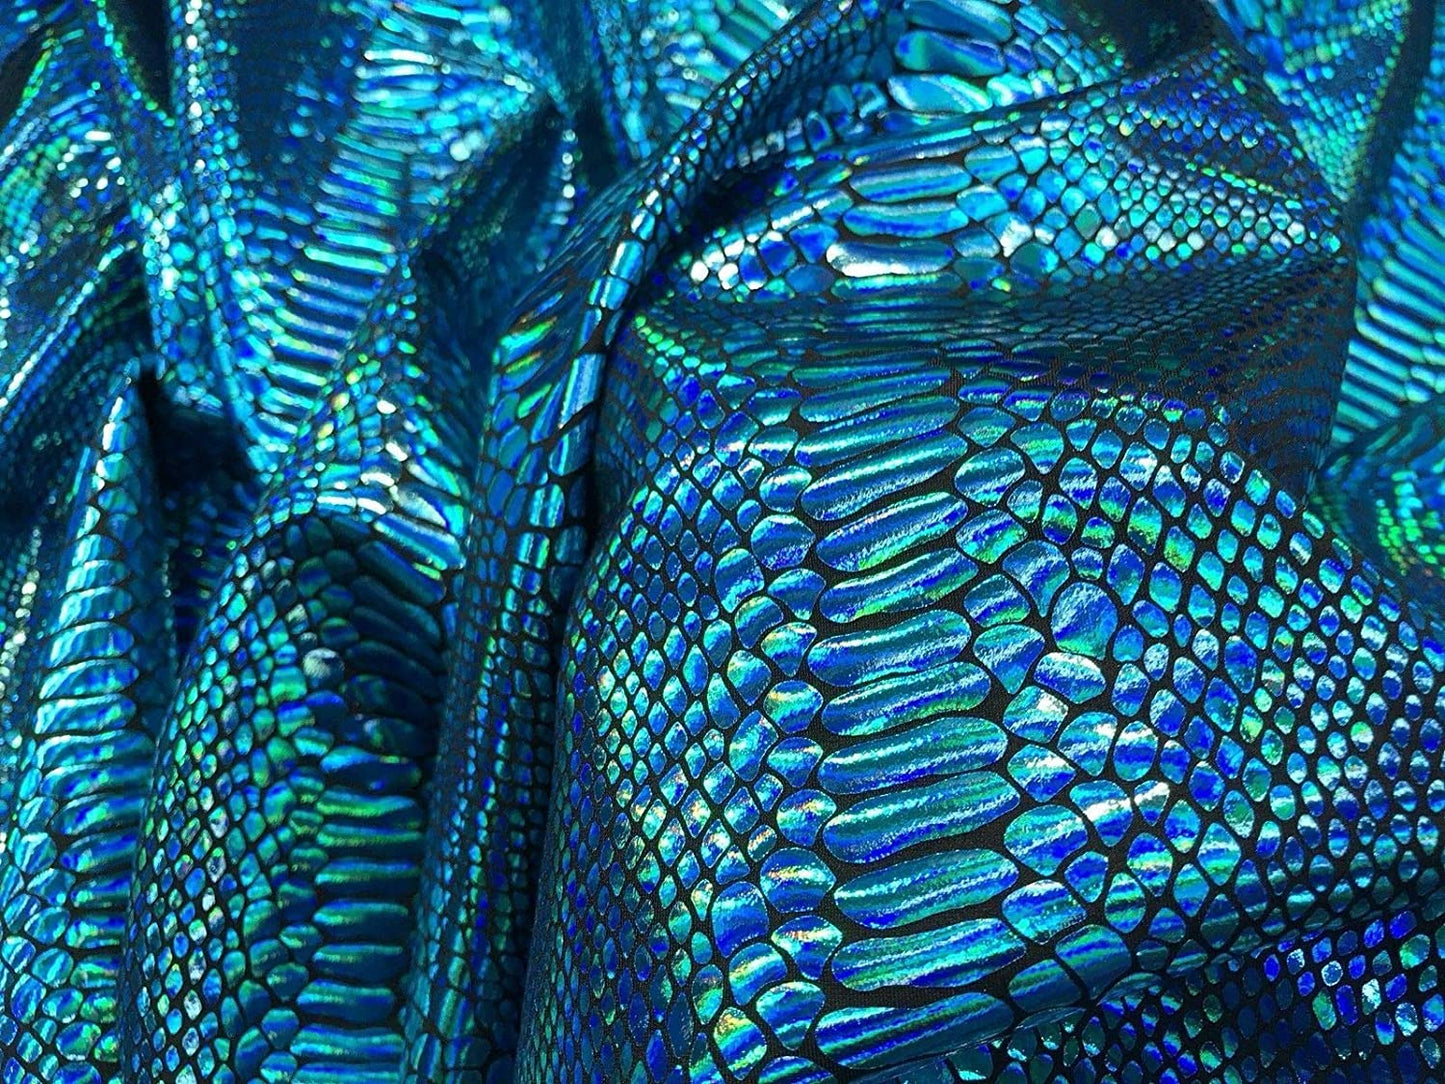 Iridescent Snake Skin Print On A Nylon 2 Way Stretch Spandex Fabric BY The Yard. (Turquoise on Black)